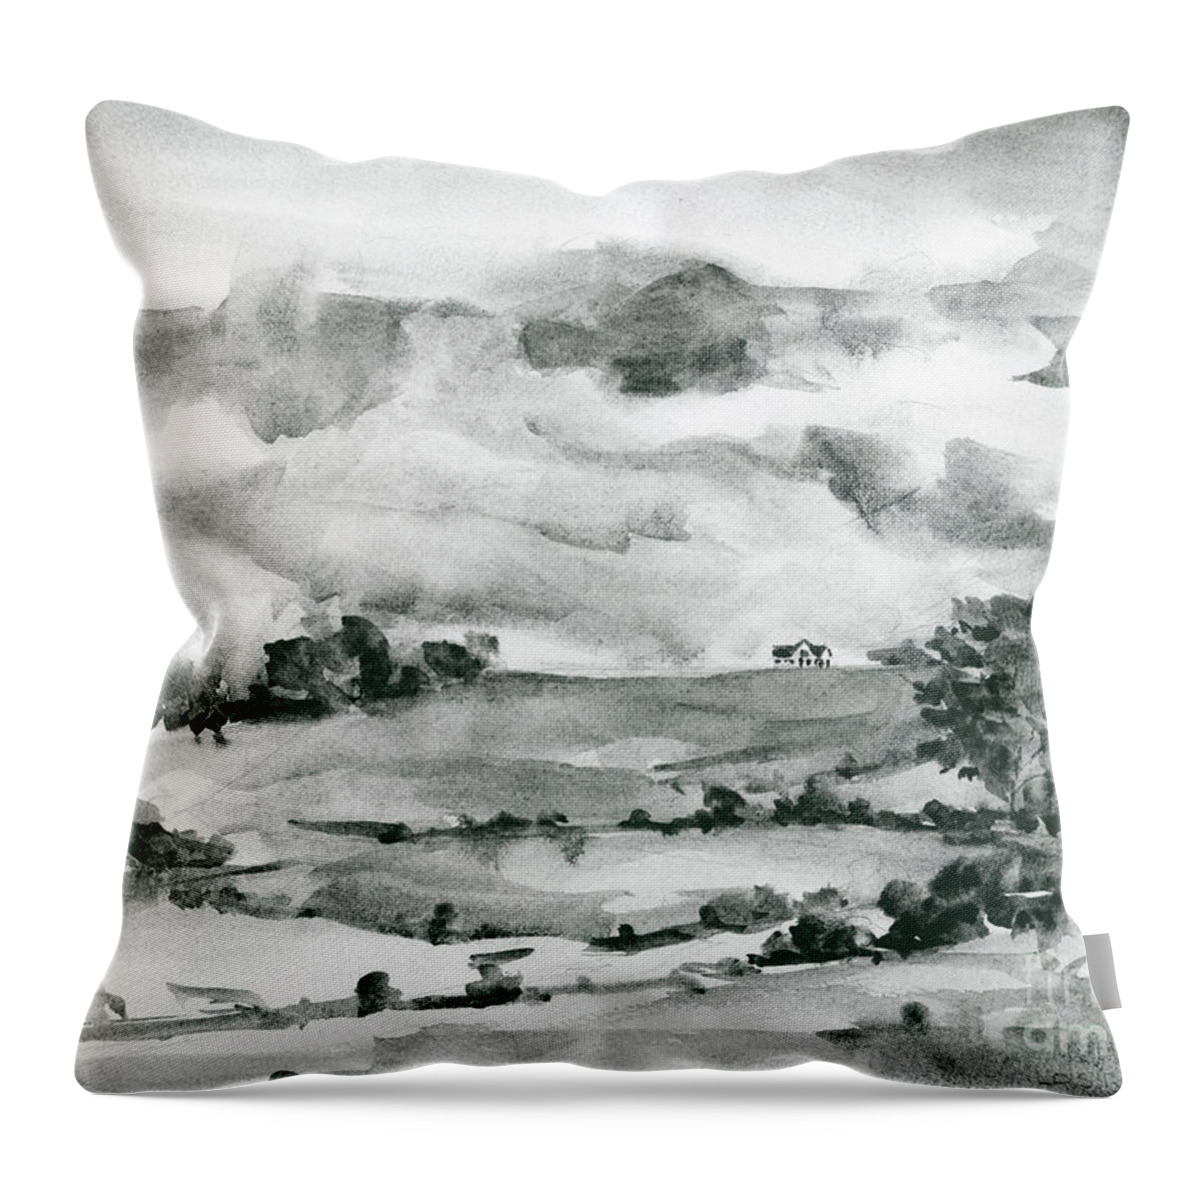 Face Mask Throw Pillow featuring the painting Solitude by Lois Blasberg